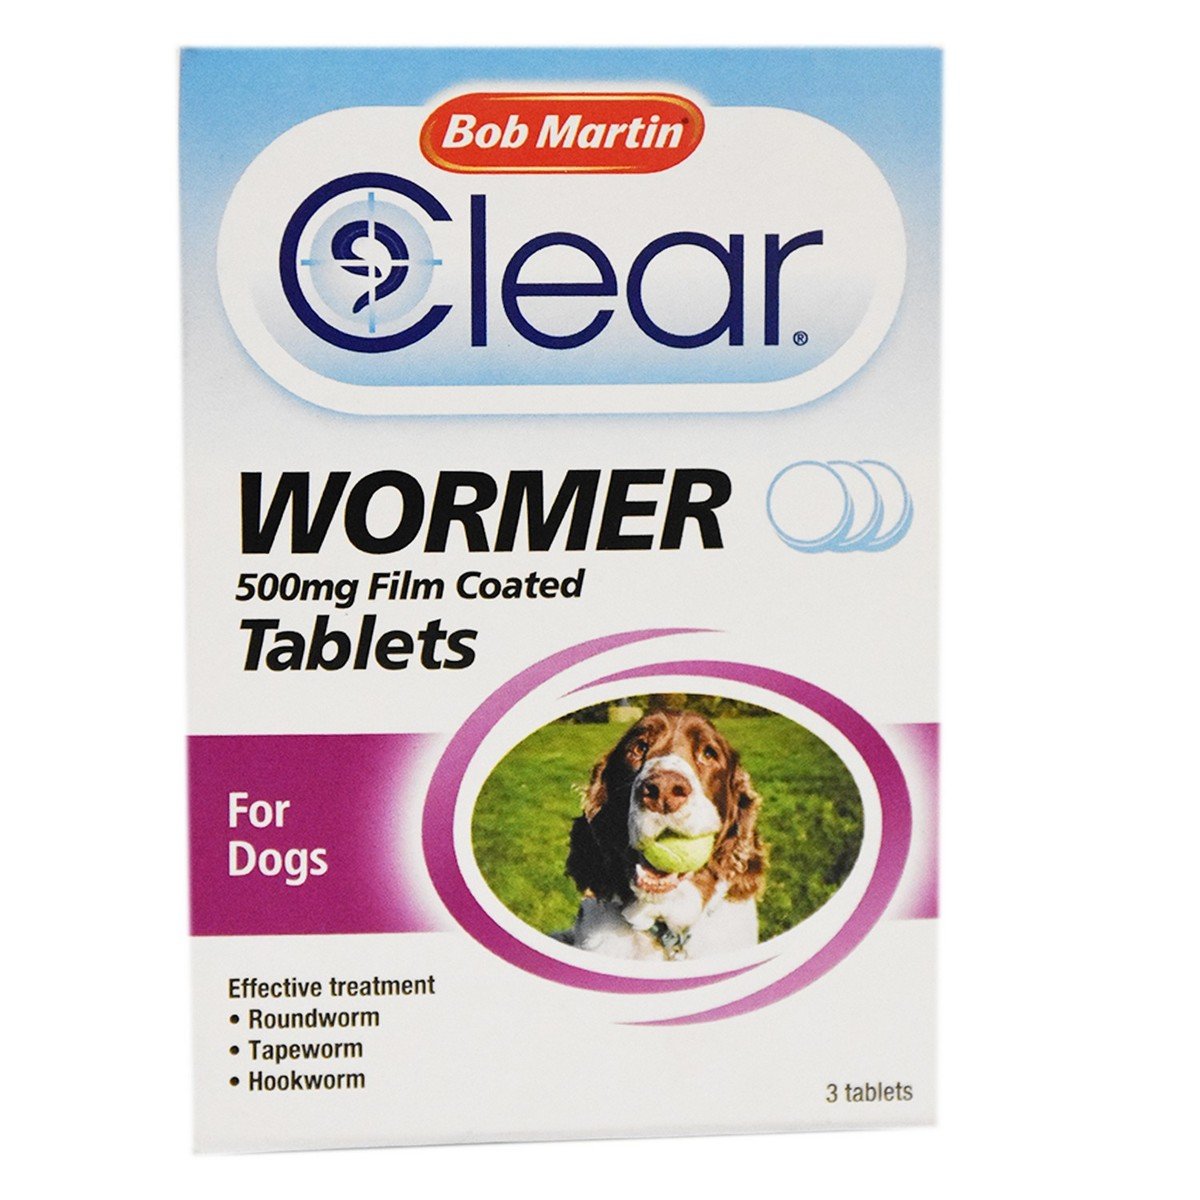 Bob Martin Clear Wormer Tablets for Dogs 500mg 3pcs